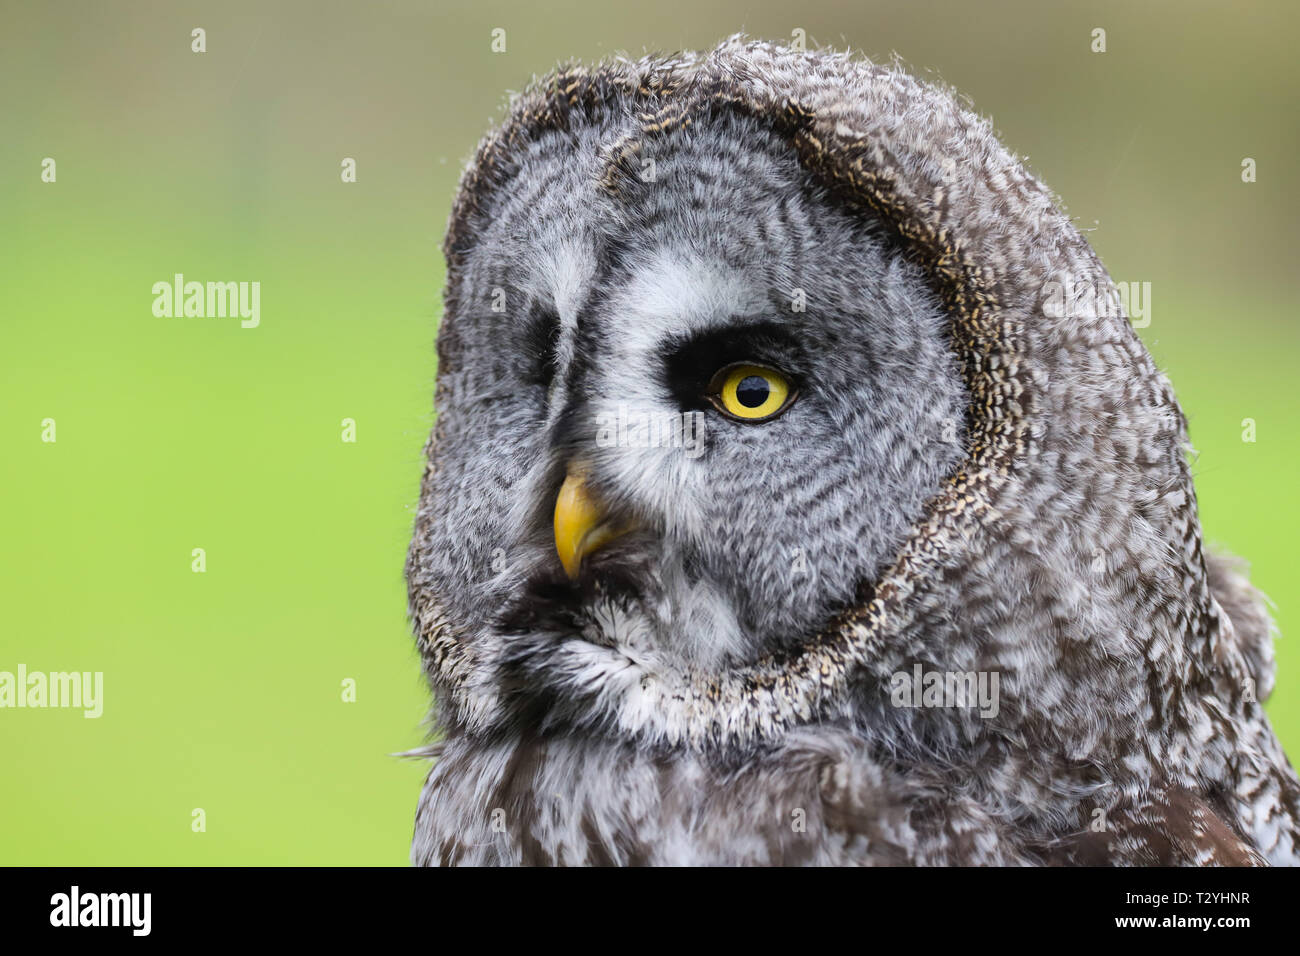 Close up head shot of a magnificent Great Grey Owl (Strix nebulosa) against a green background Stock Photo